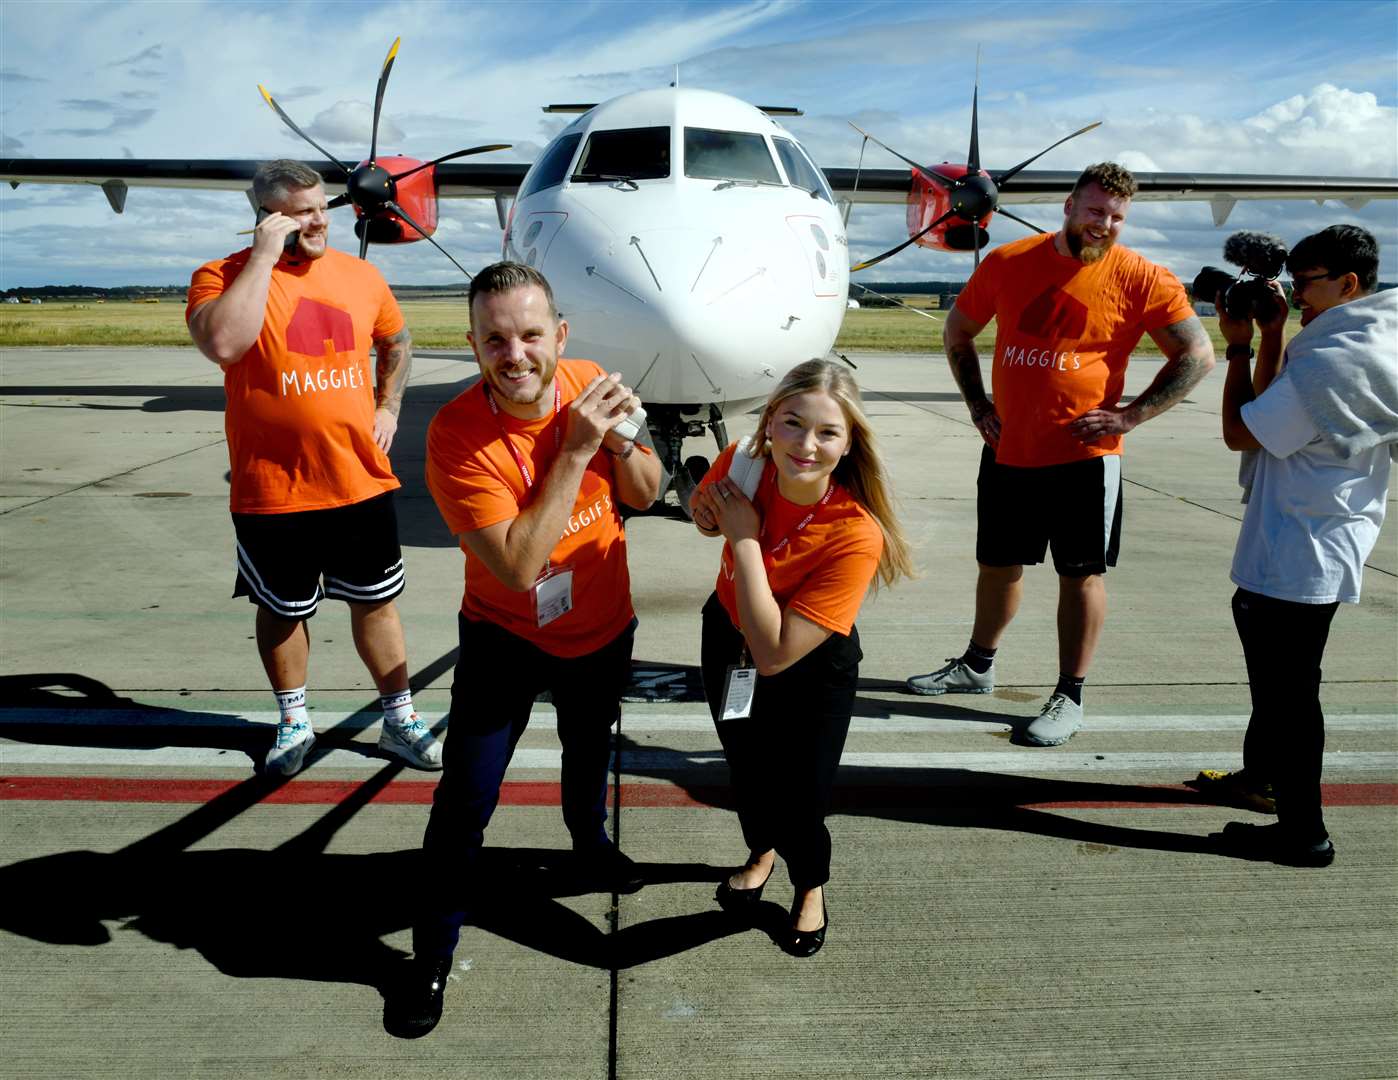 Andrew Benjamin and Mia Pimm from Maggies pulling the plane while Luke Stoltman and Tom Stoltman take a break. Picture: James Mackenzie.